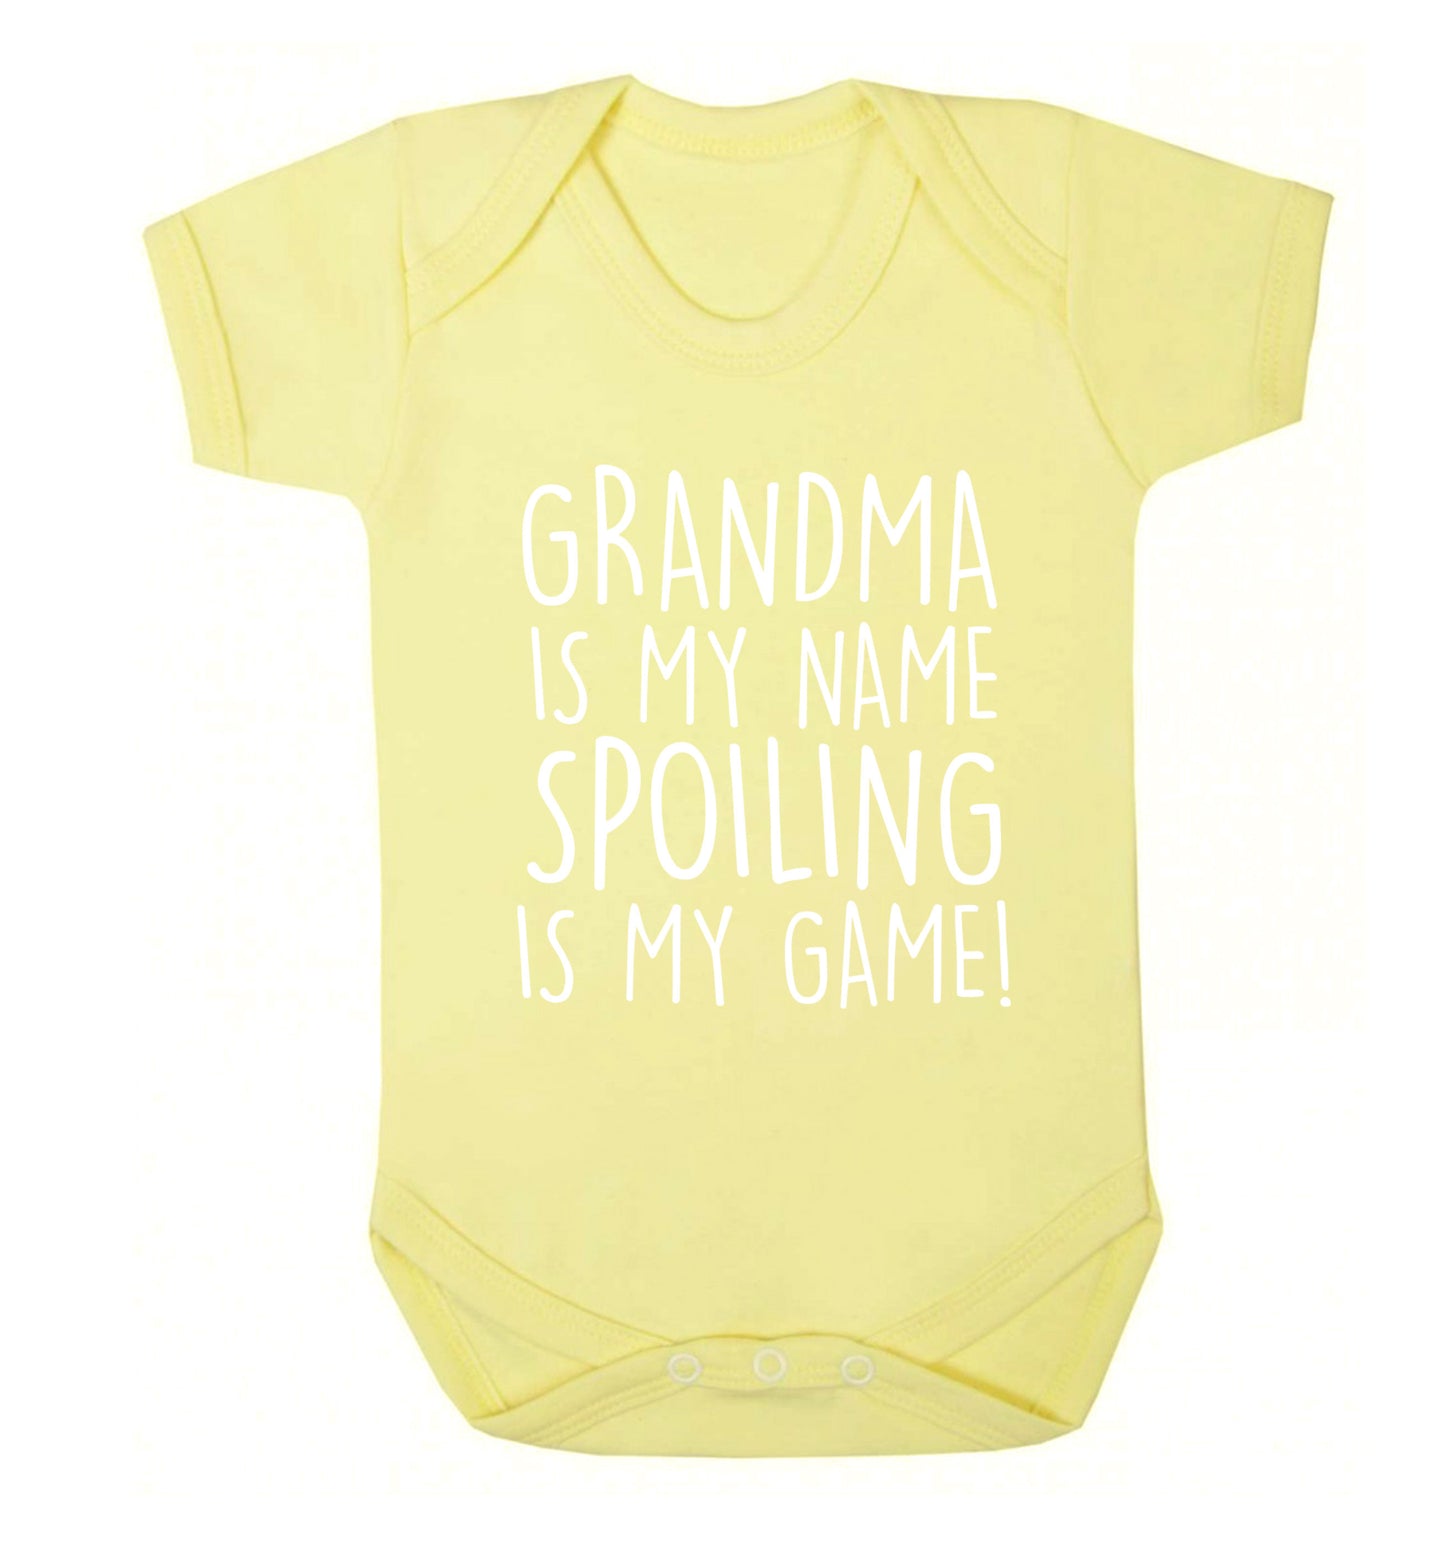 Grandma is my name, spoiling is my game Baby Vest pale yellow 18-24 months